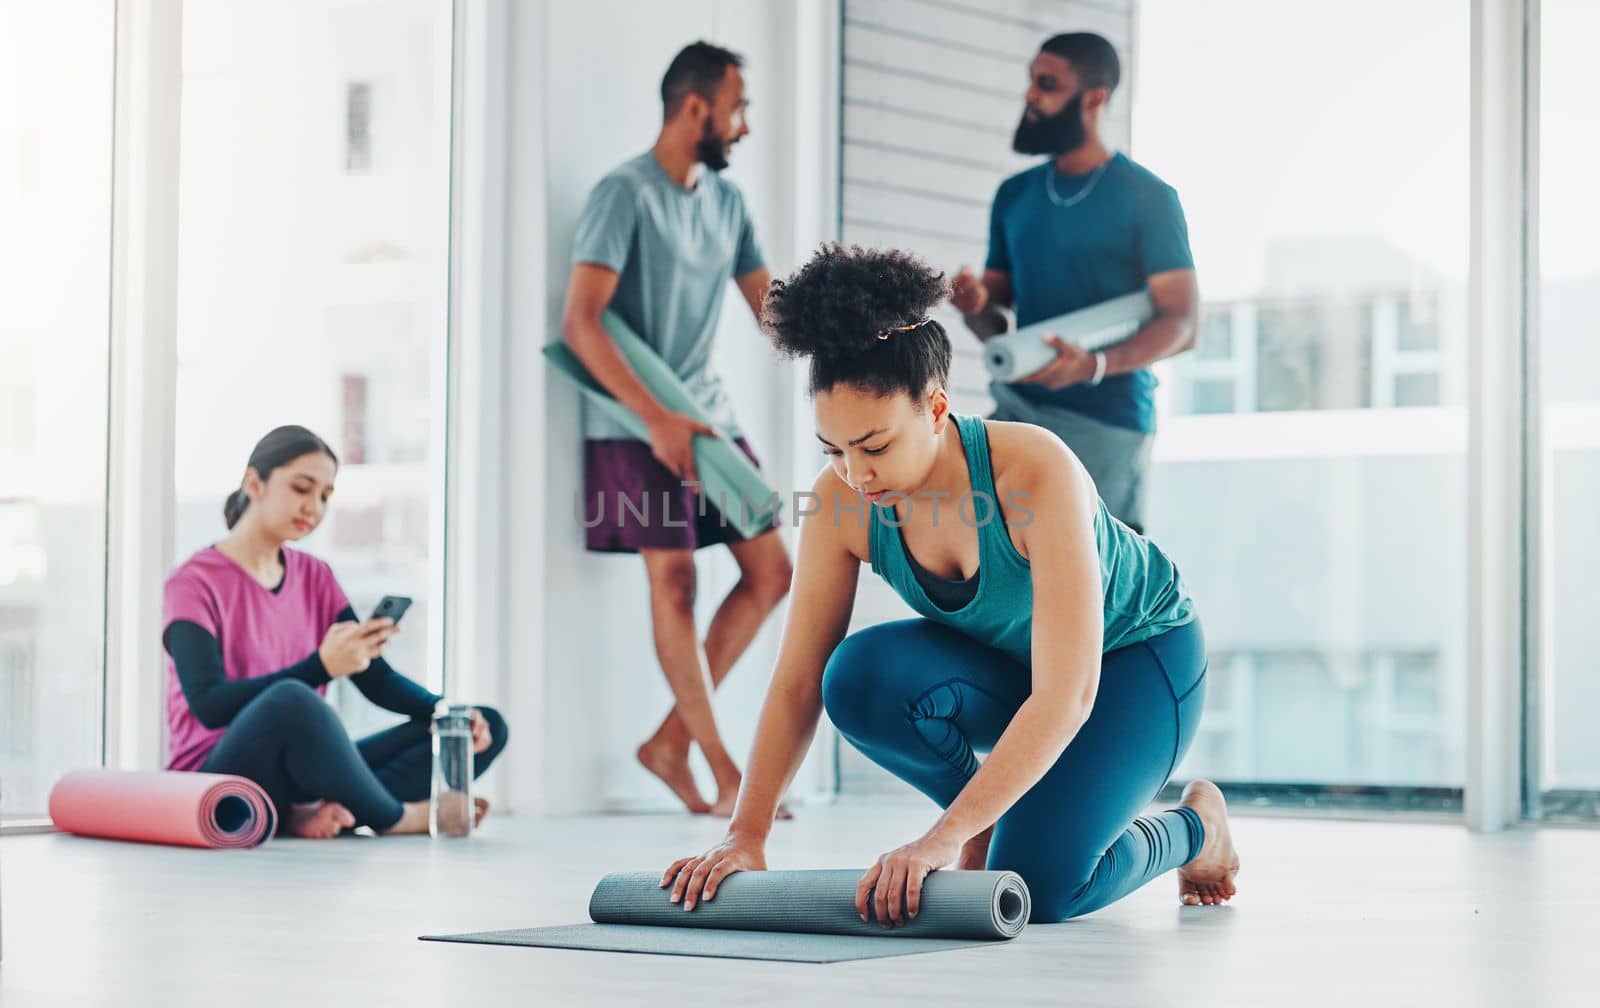 Yoga, fitness and a black woman rolling her mat on the floor of a studio for exercise or wellness. Gym, workout and health with a female yogi in the gym for pilates training or spiritual wellbeing by YuriArcurs